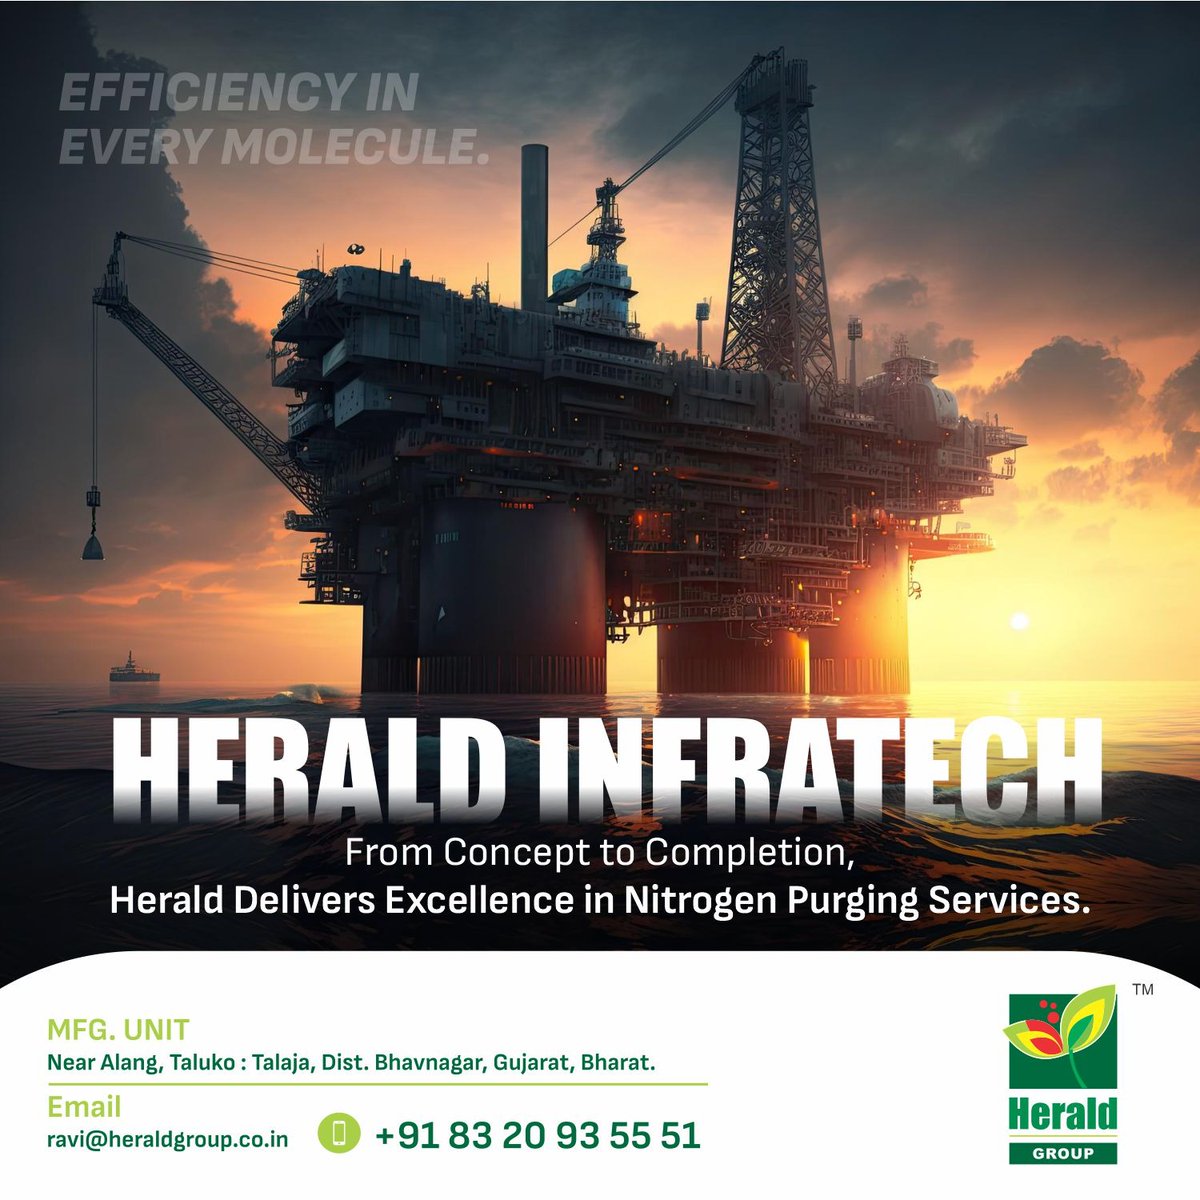 From Concept to Completion, Herald Delivers Excellence in Nitrogen Purging Services.

#heraldinfratech #nitrogenpurging #cleaning